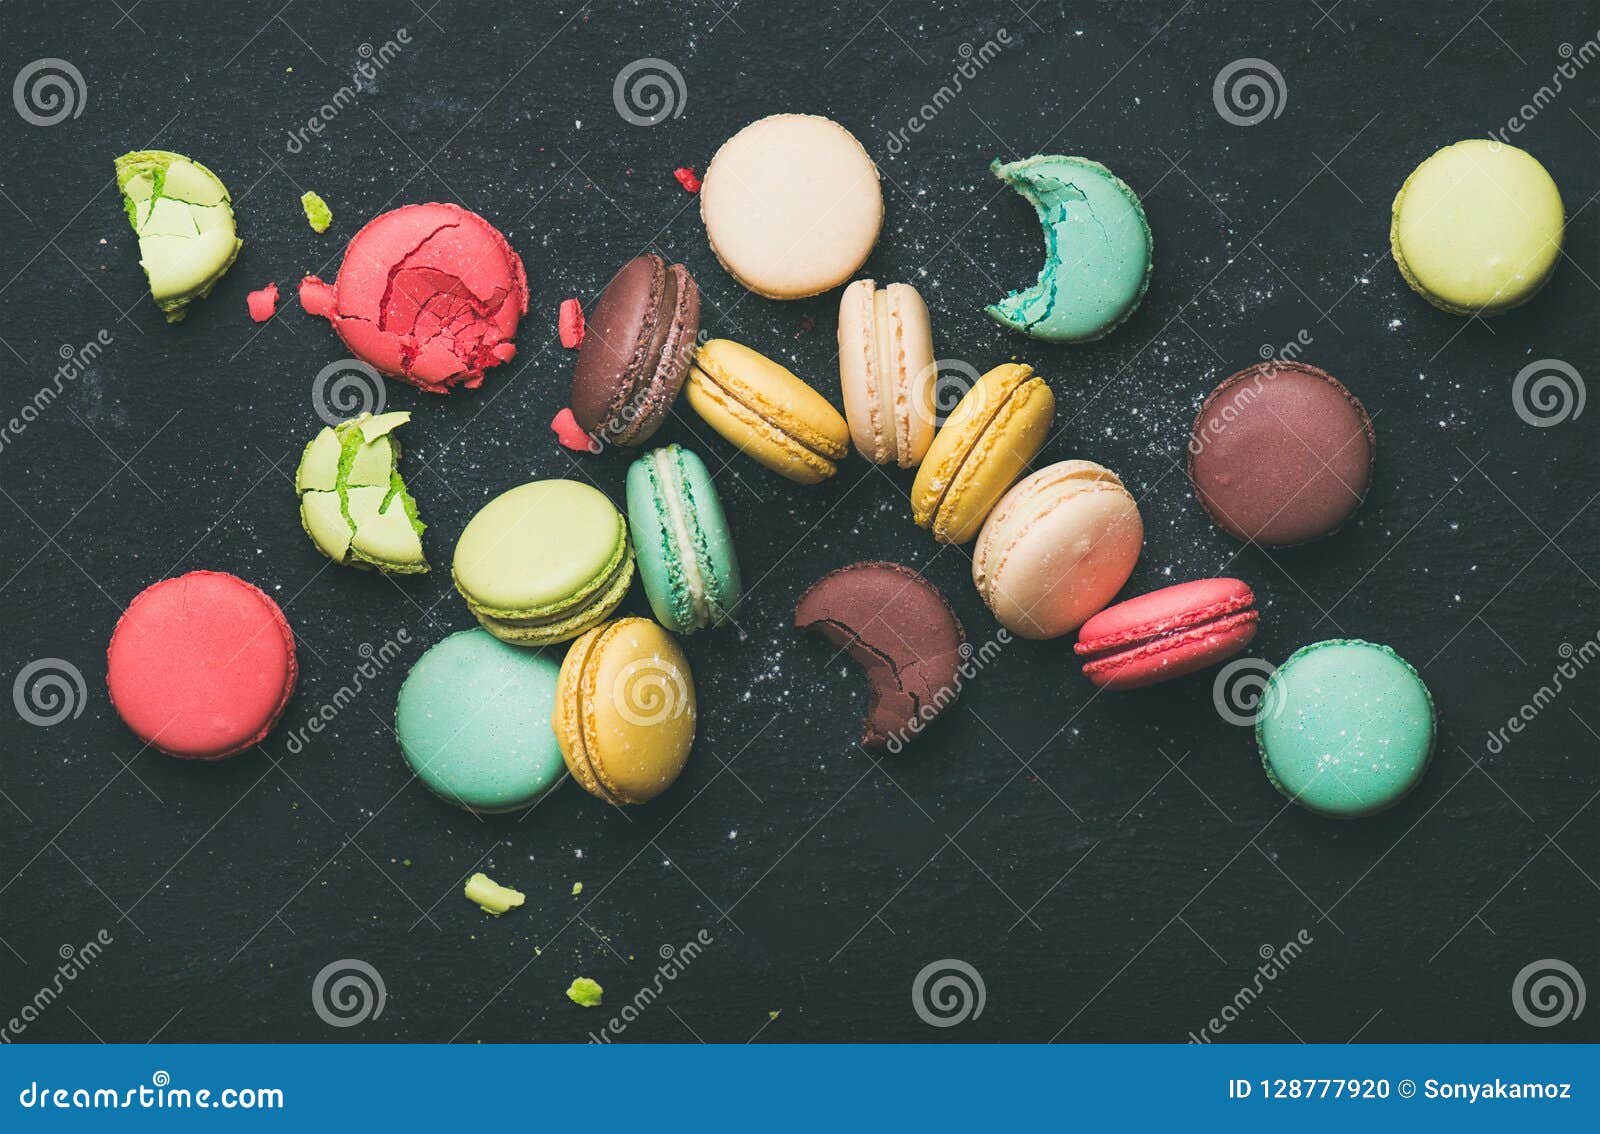 flat-lay of sweet colorful french macaroon cookies variety